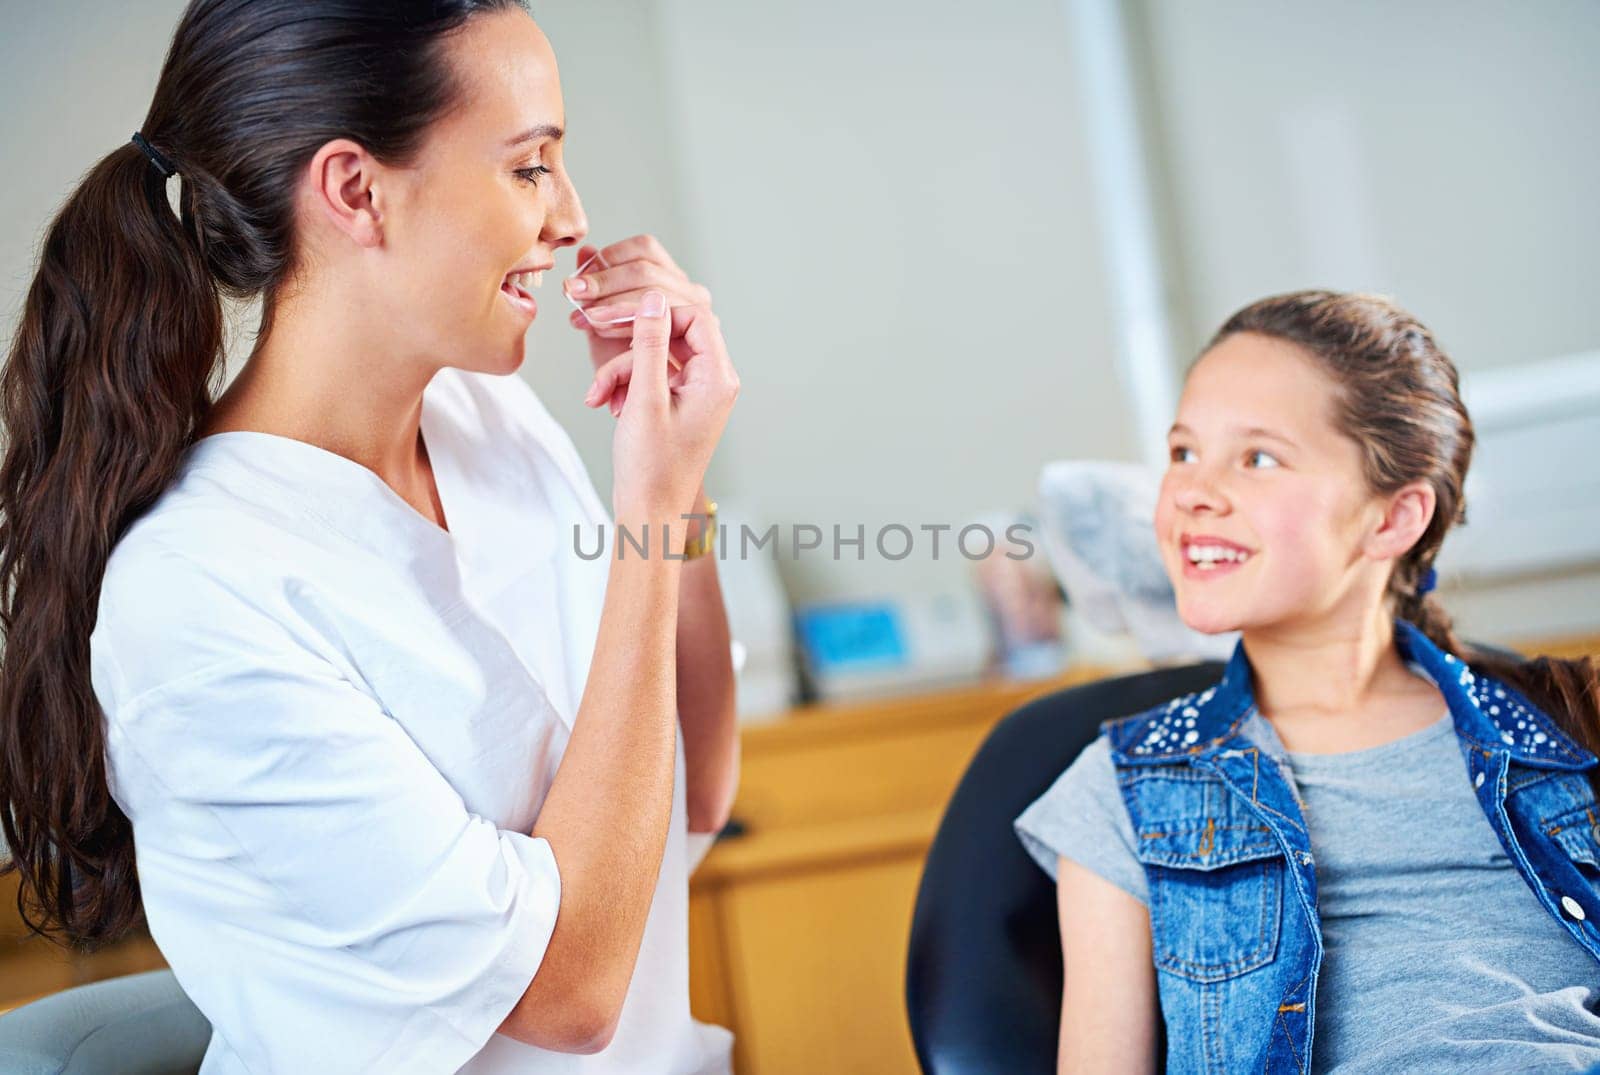 Technique is everything with flossing. a female dentist and child in a dentist office